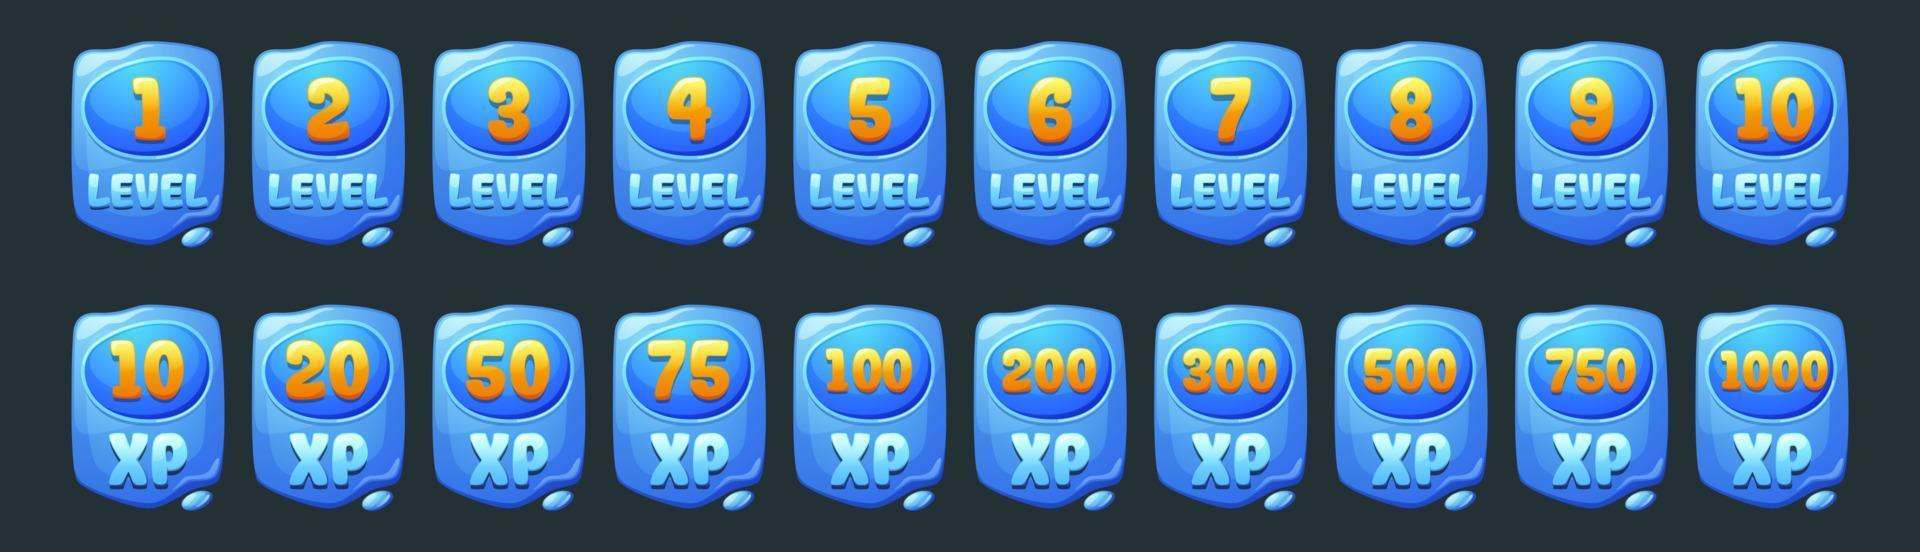 Set of water game level ui icons, blue banners vector